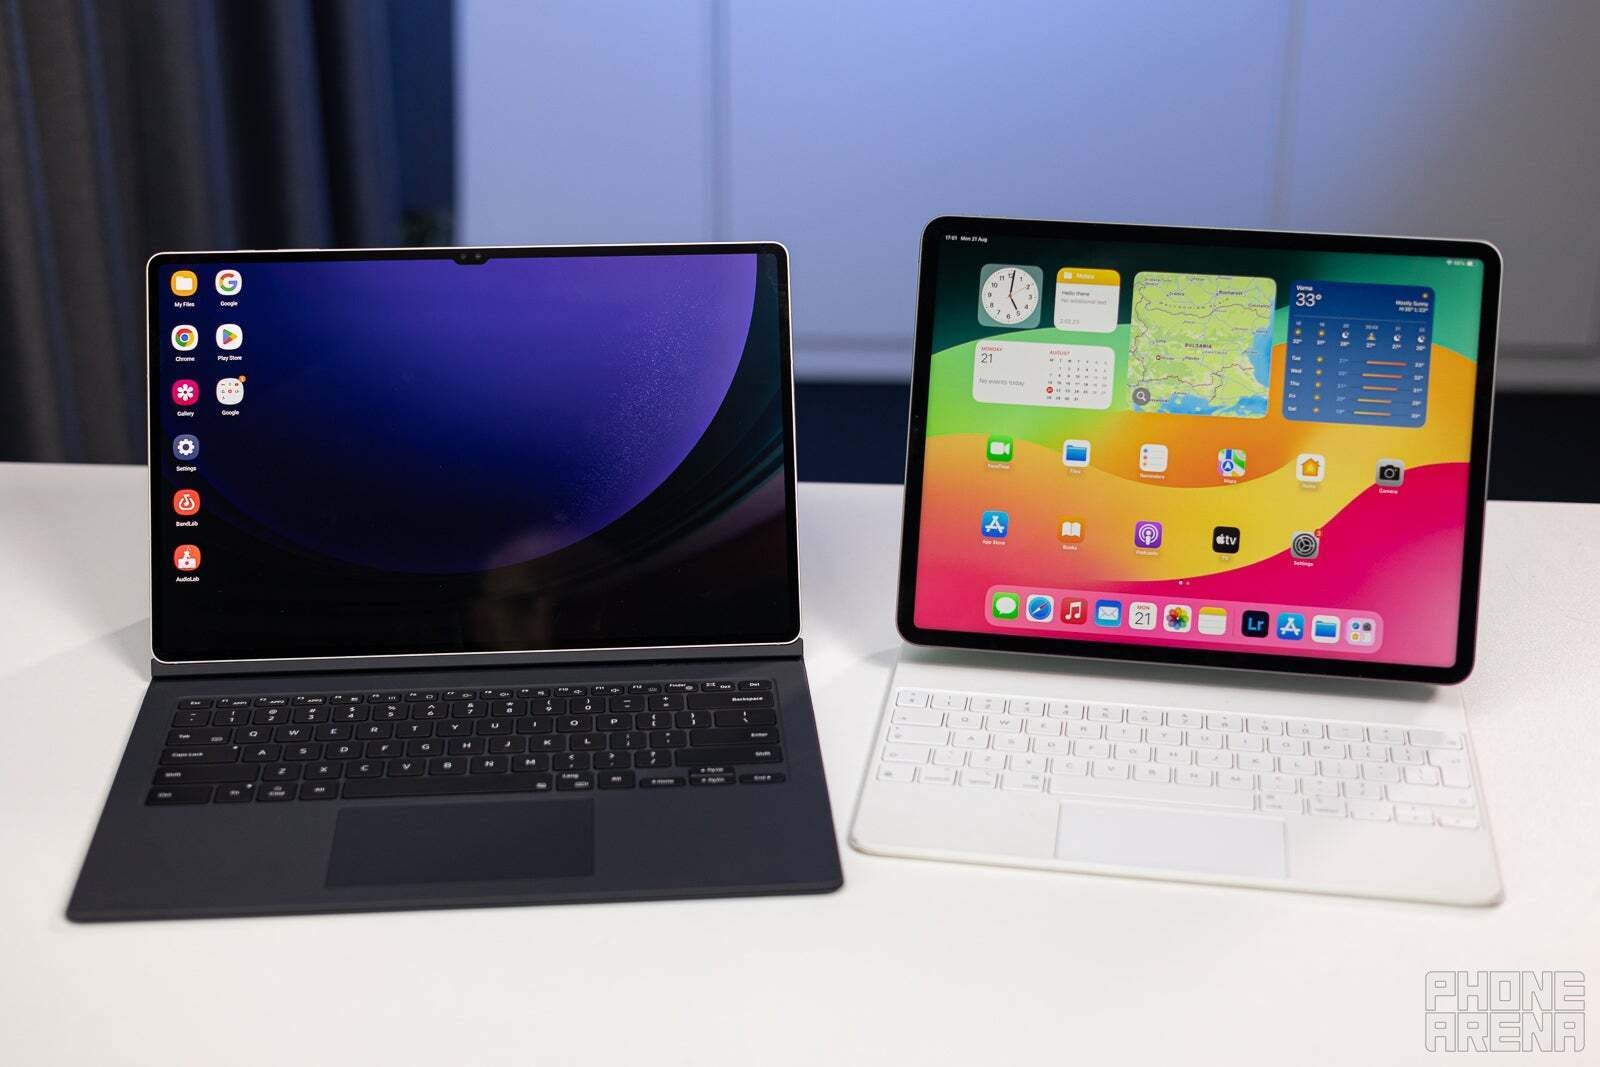 We could argue that the Samsung Galaxy Tab S9 Ultra (left) does the whole computer thing way better, and Apple is pressured to play catch-up (Image credit - PhoneArena) - Is Apple finally afraid of the competition? Unusual moves: folding MacBooks, iPhones, AR/VR headset, PC-like iPad